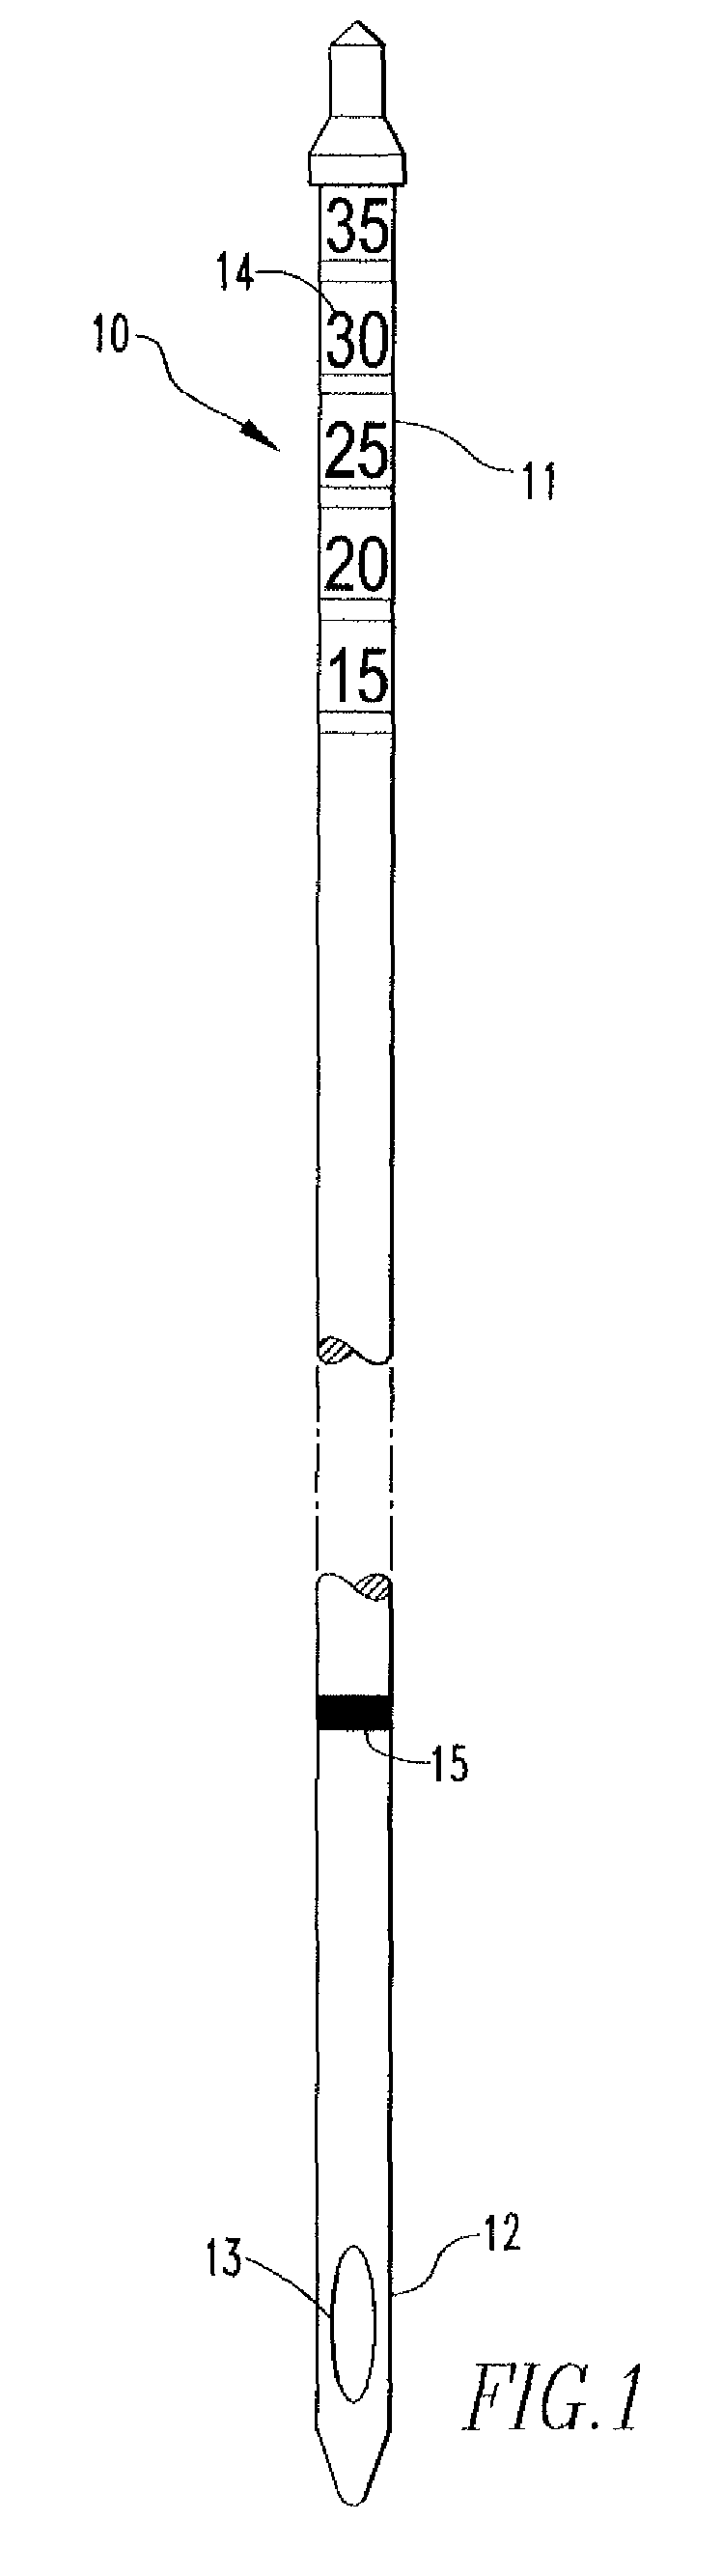 Device and method for use during ligament reconstruction surgery